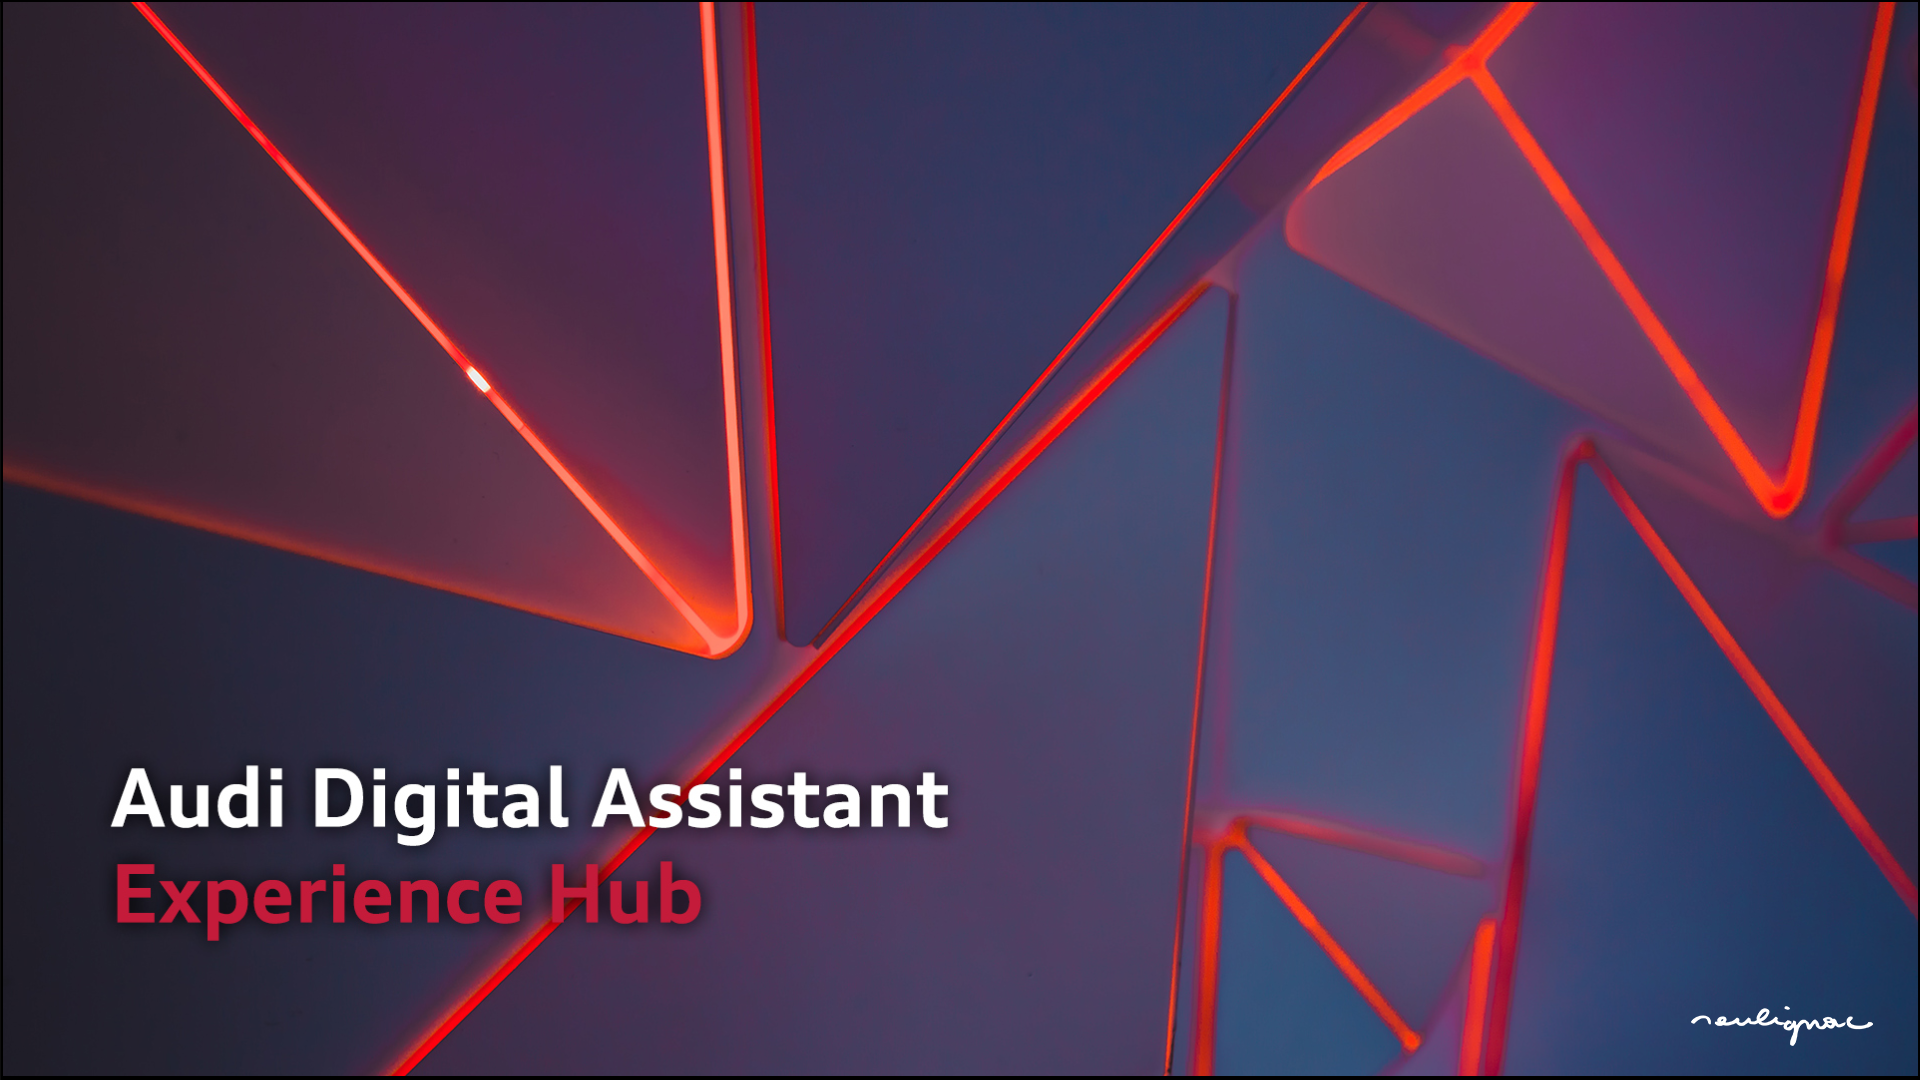 Audi China - Digital Assistant Researches - EXPERIENCE HUB - Art direction for video storyboard - Francois Soulignac, MADJOR Labbrand Shanghai, China